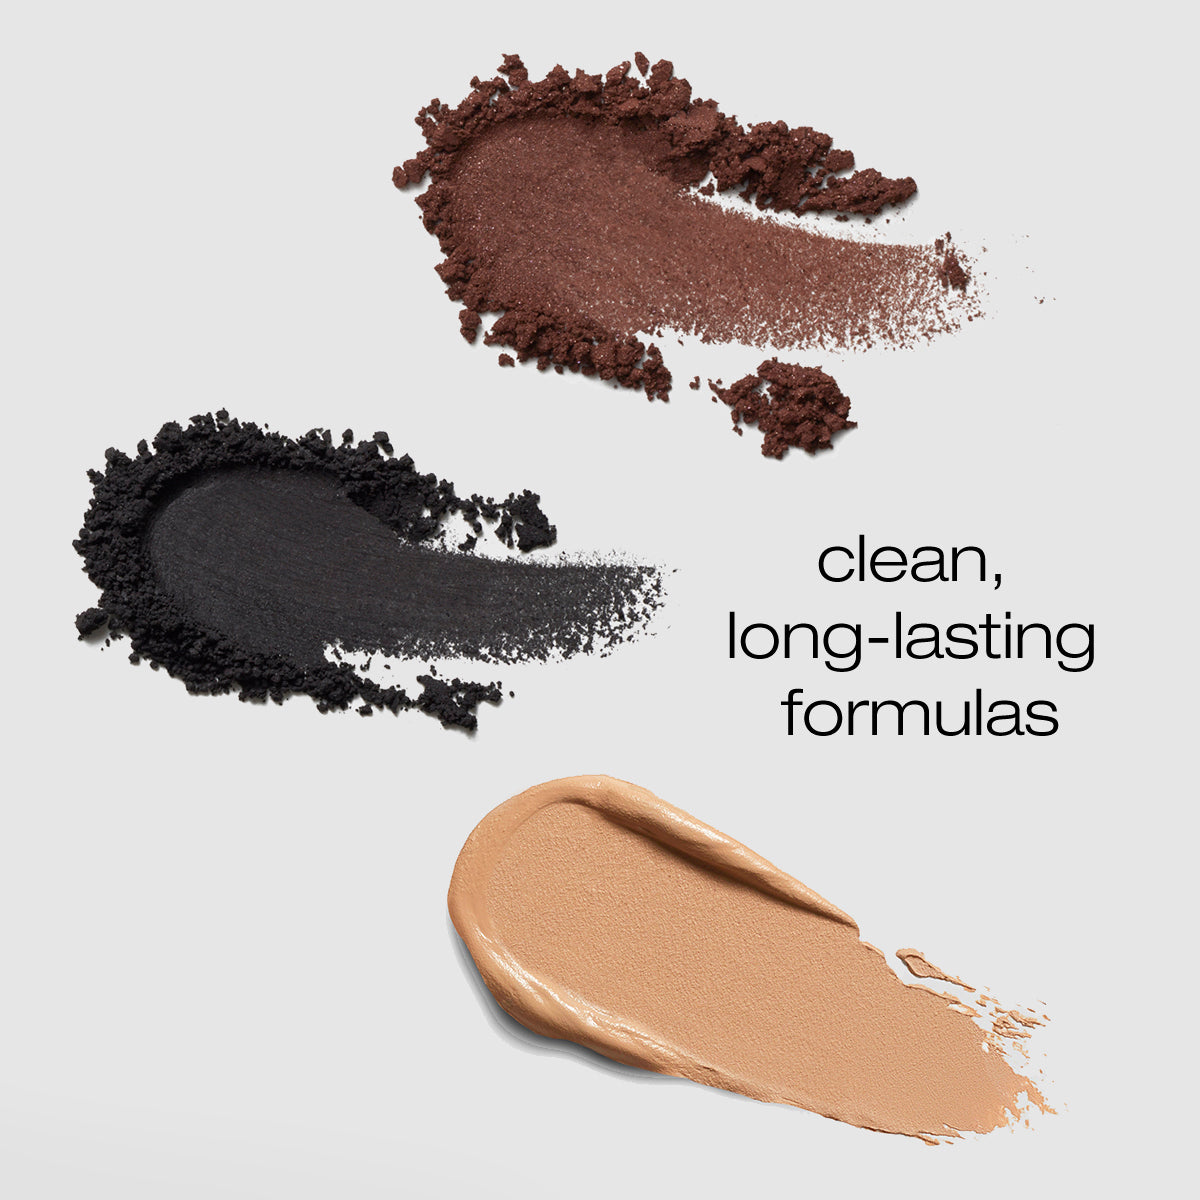 3 Smudges of the palette showing the eyeliners are powder based and concealer is cream for clean, long-lasting formulas